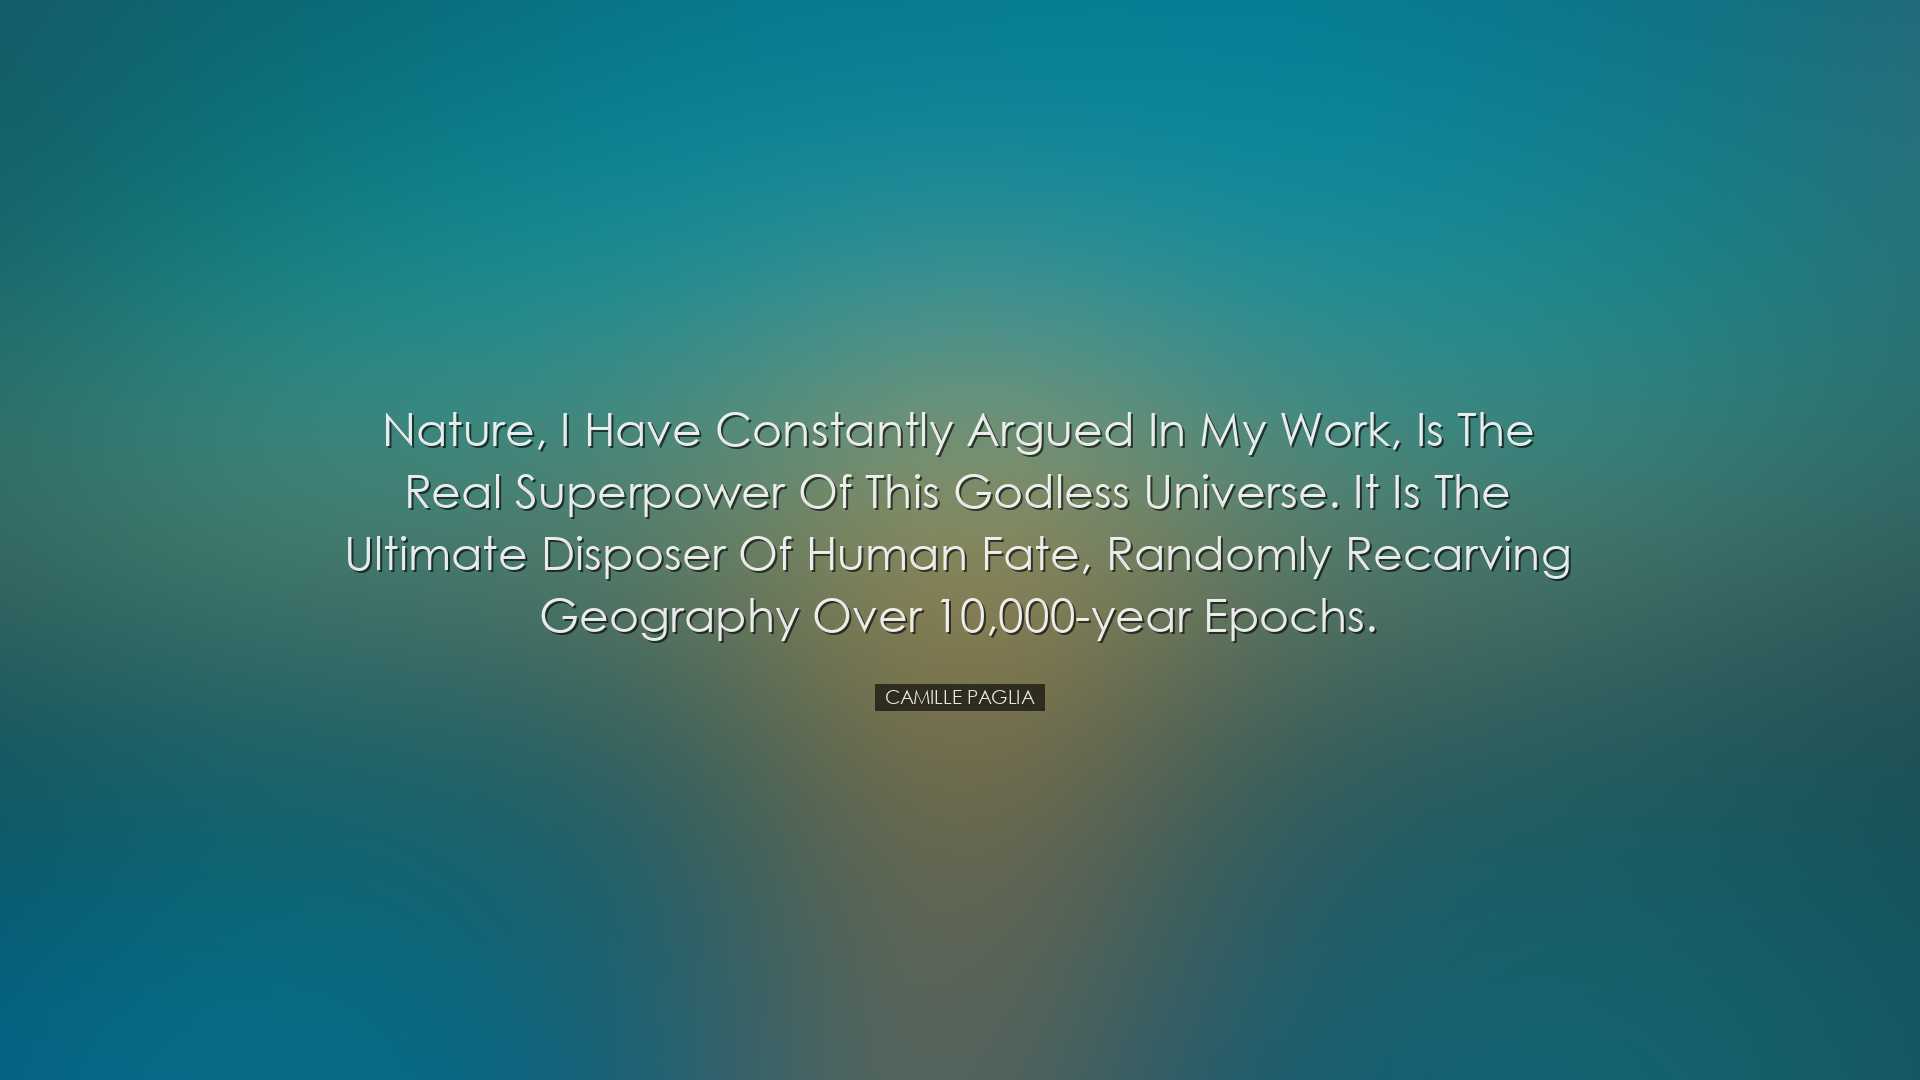 Nature, I have constantly argued in my work, is the real superpowe